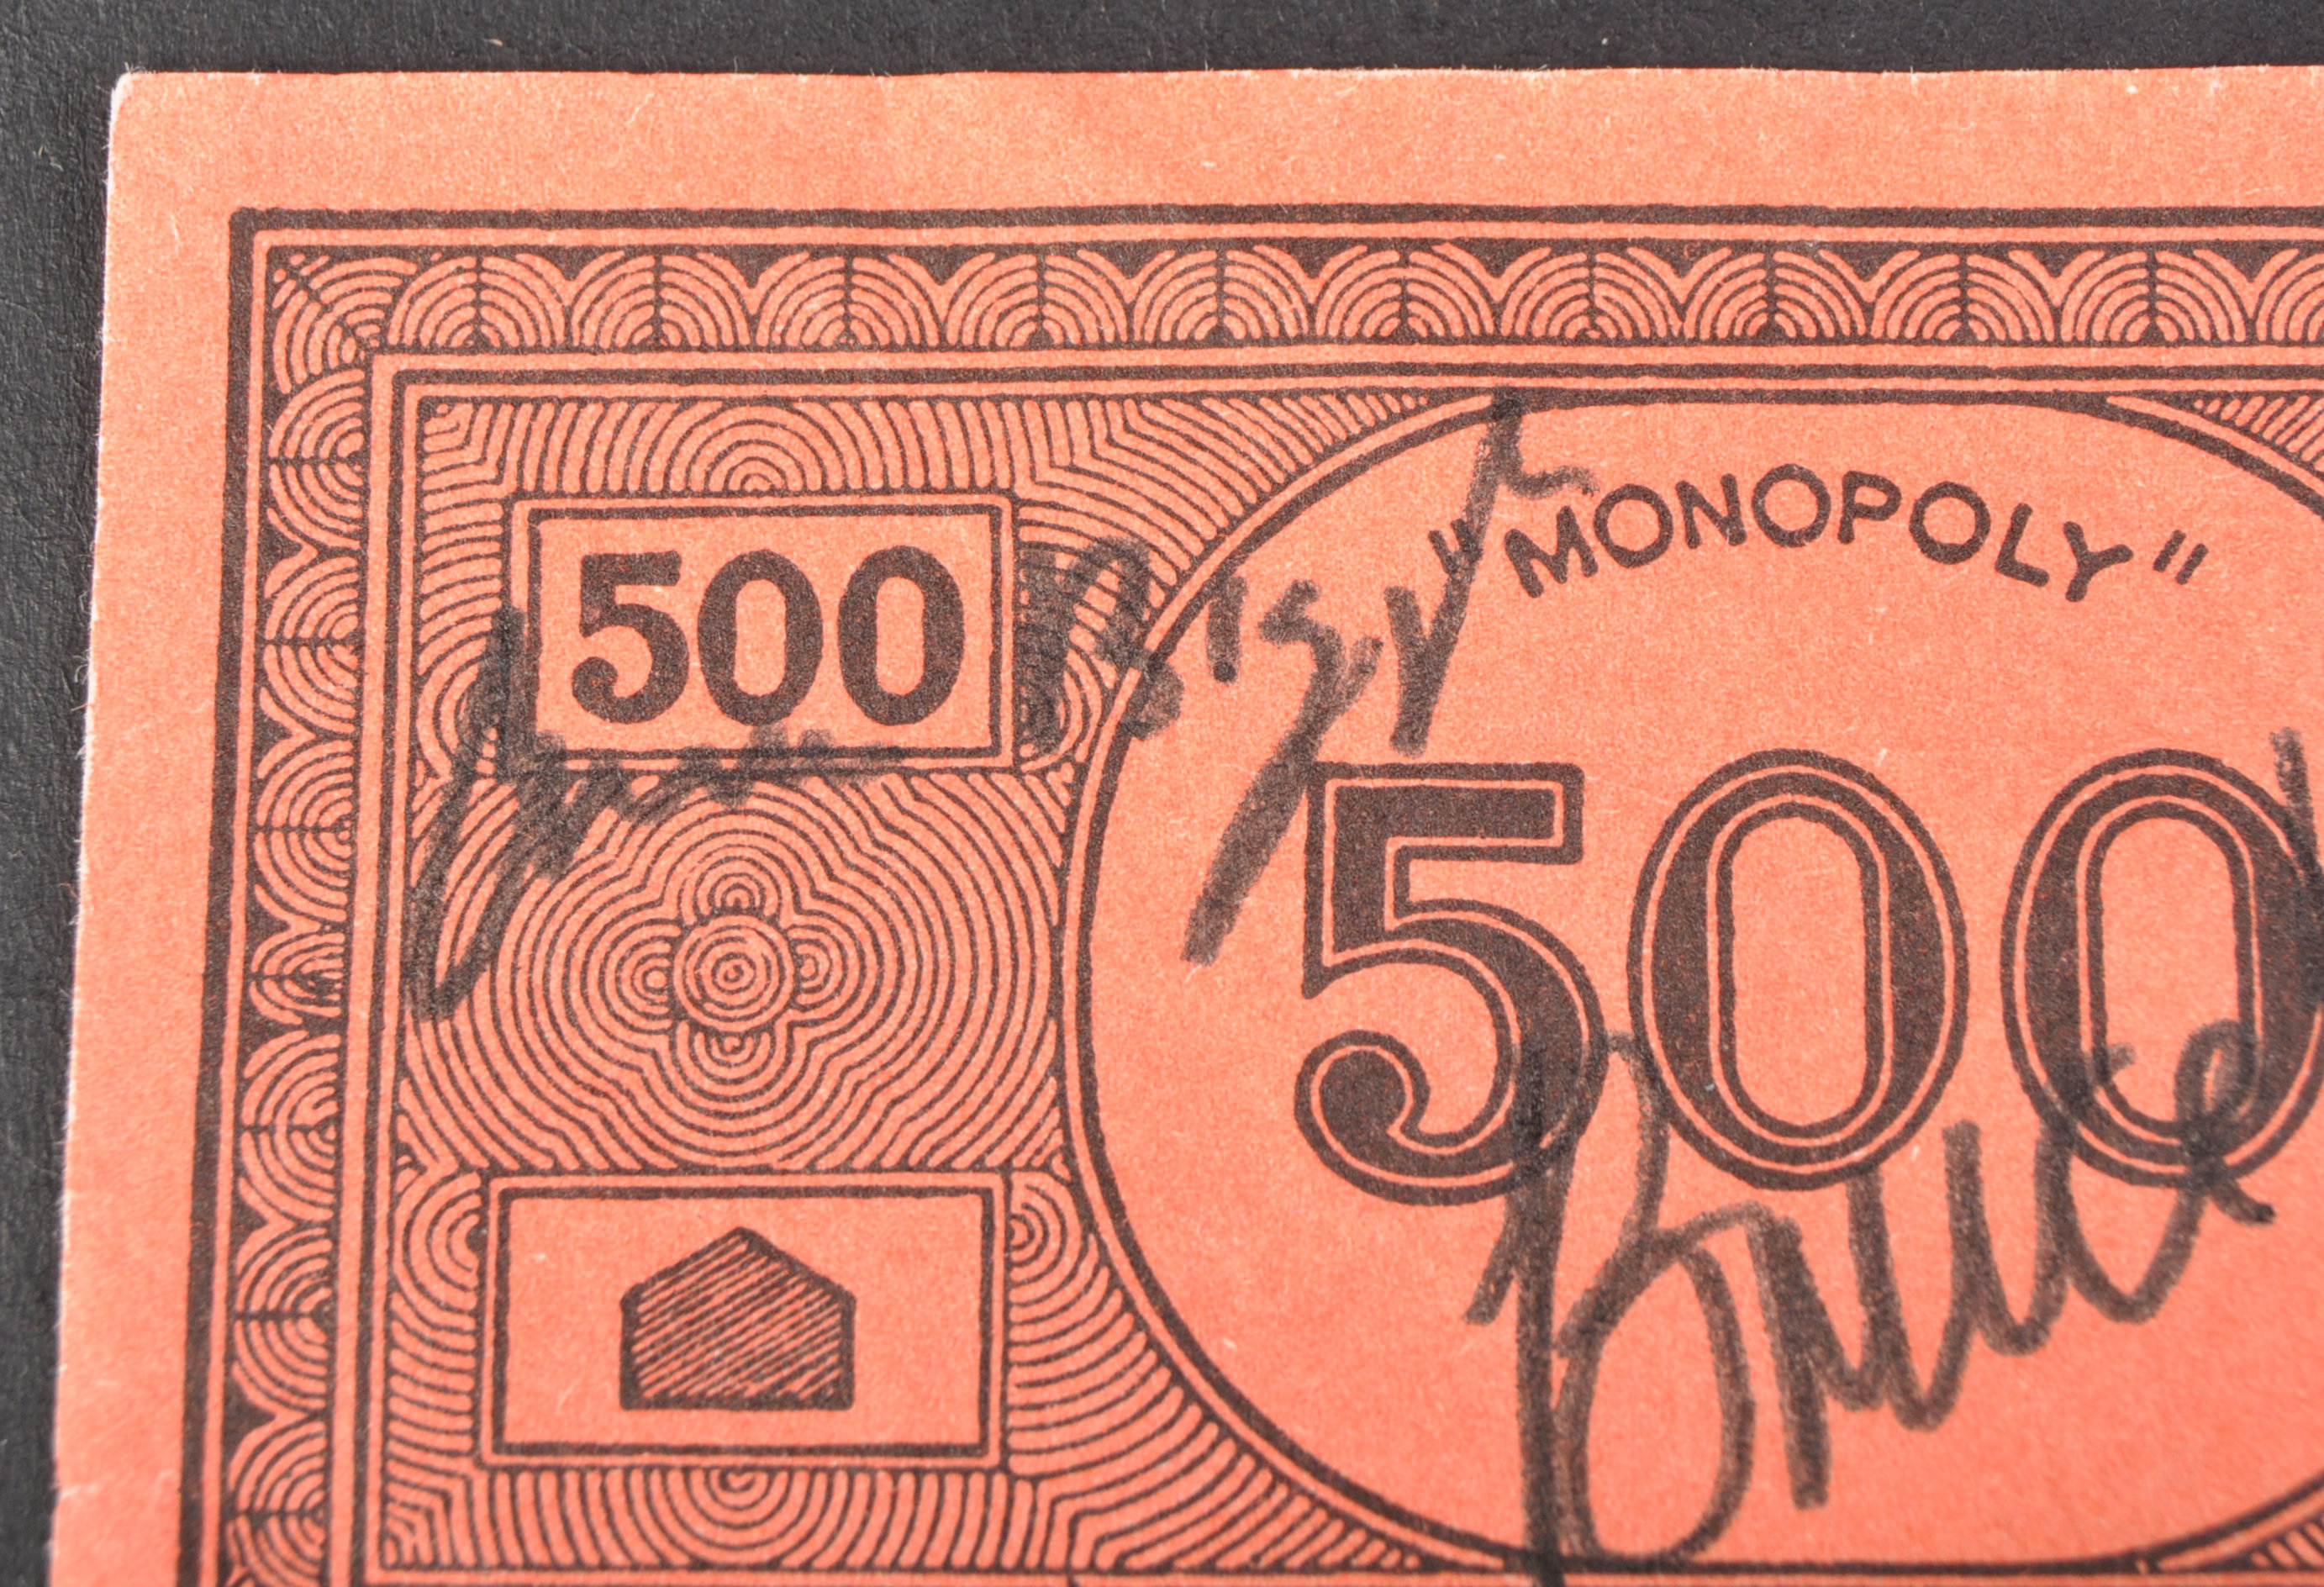 GREAT TRAIN ROBBERY - DUAL SIGNED MONOPOLY BANK NOTE - Image 2 of 3